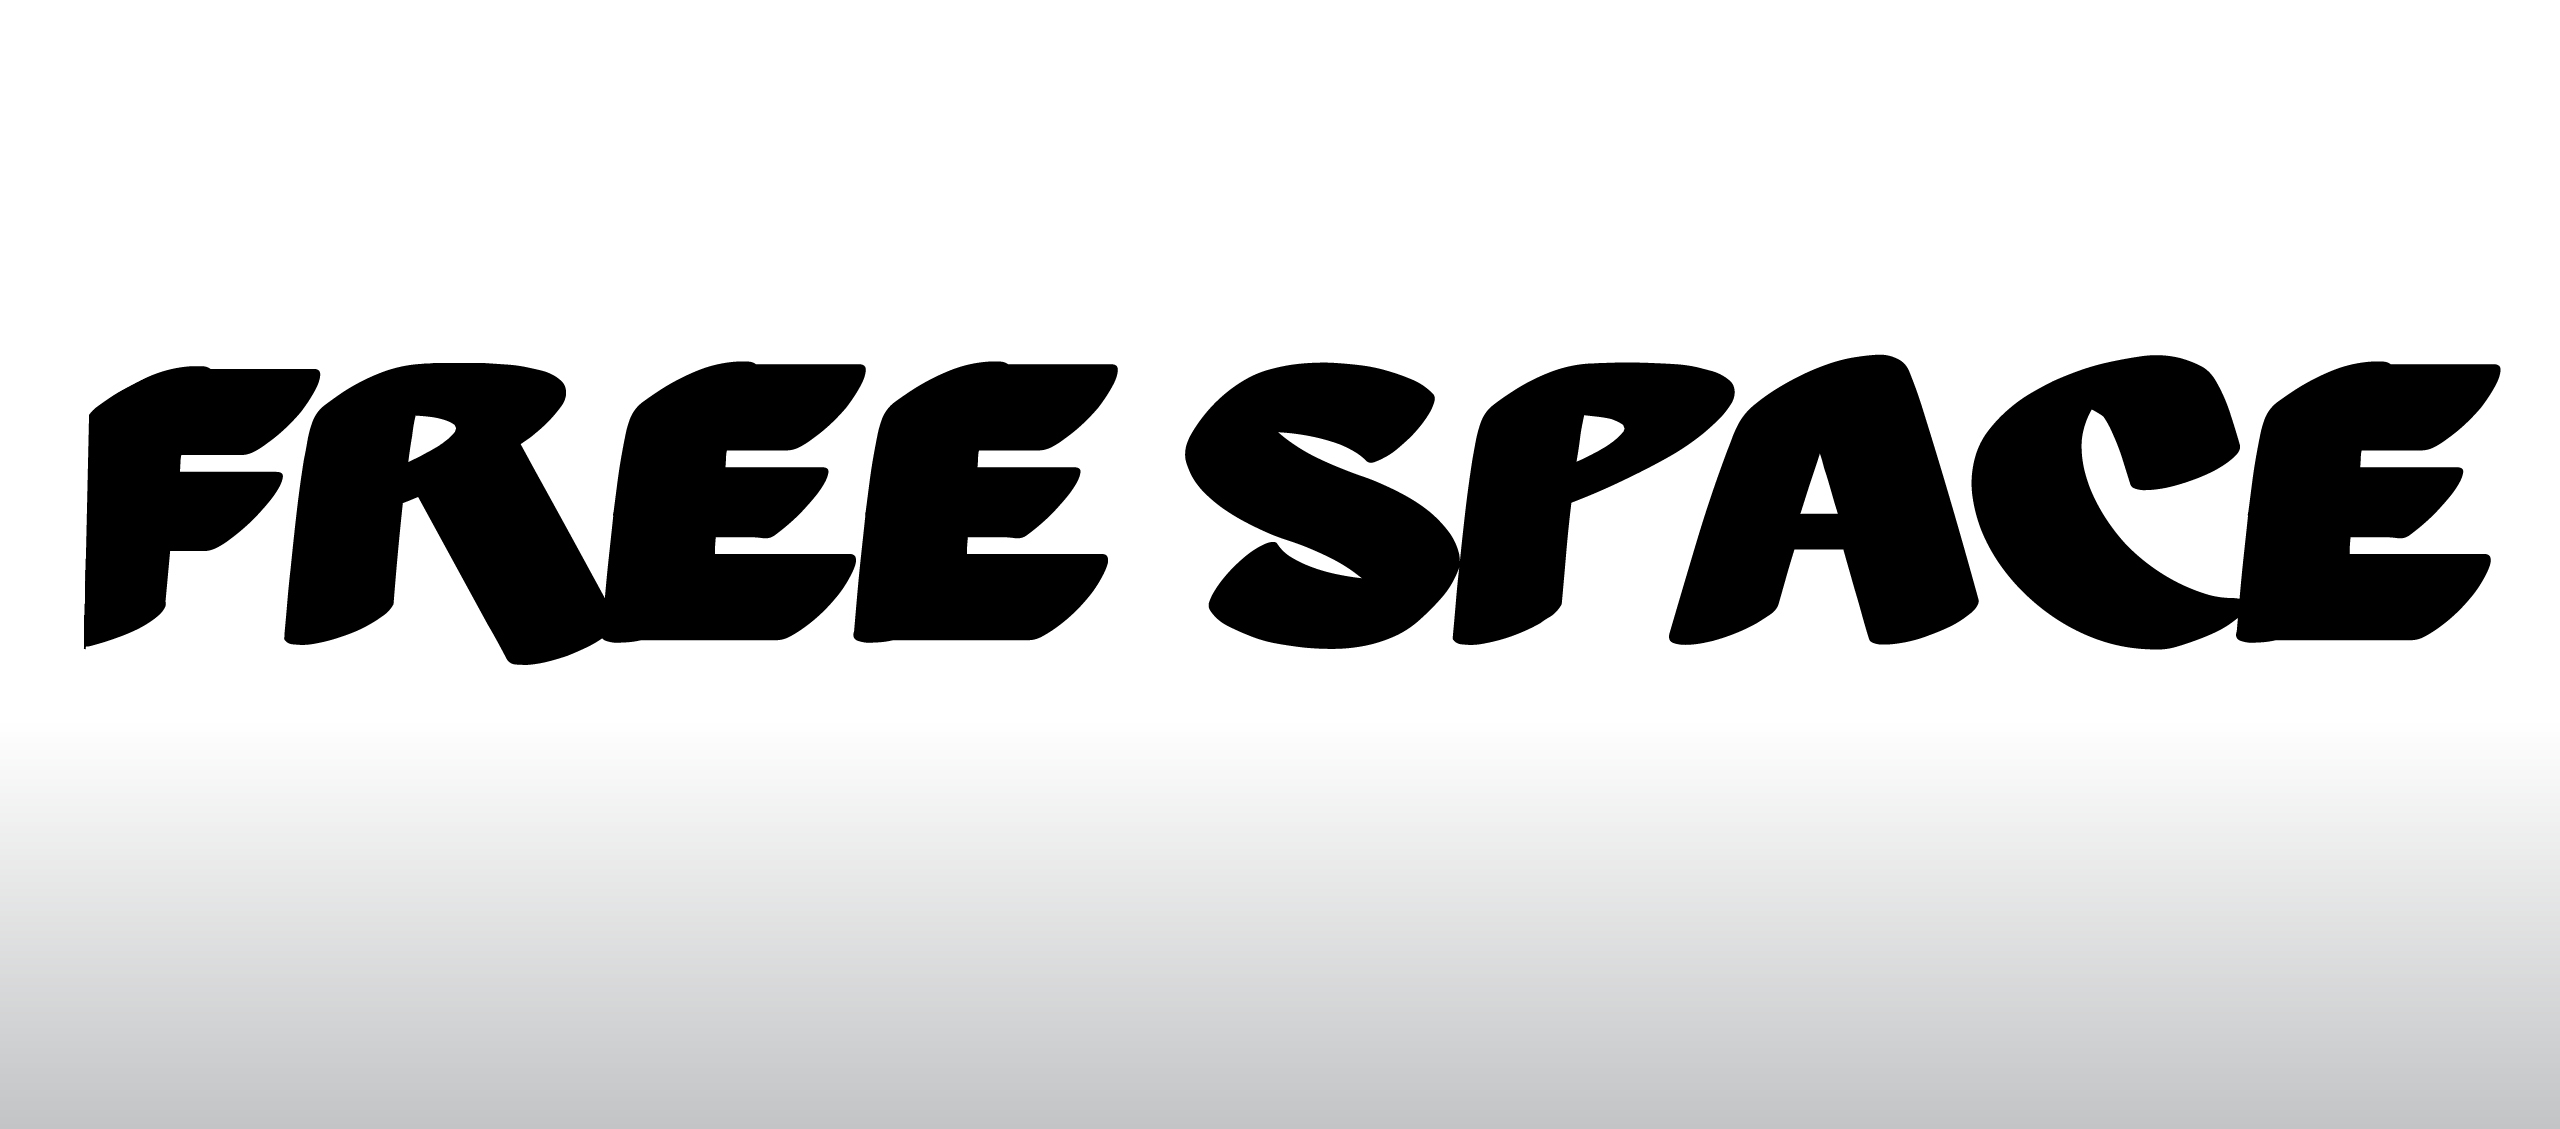 Hand painted all-caps black lettering that reads "Free Space" on a white background